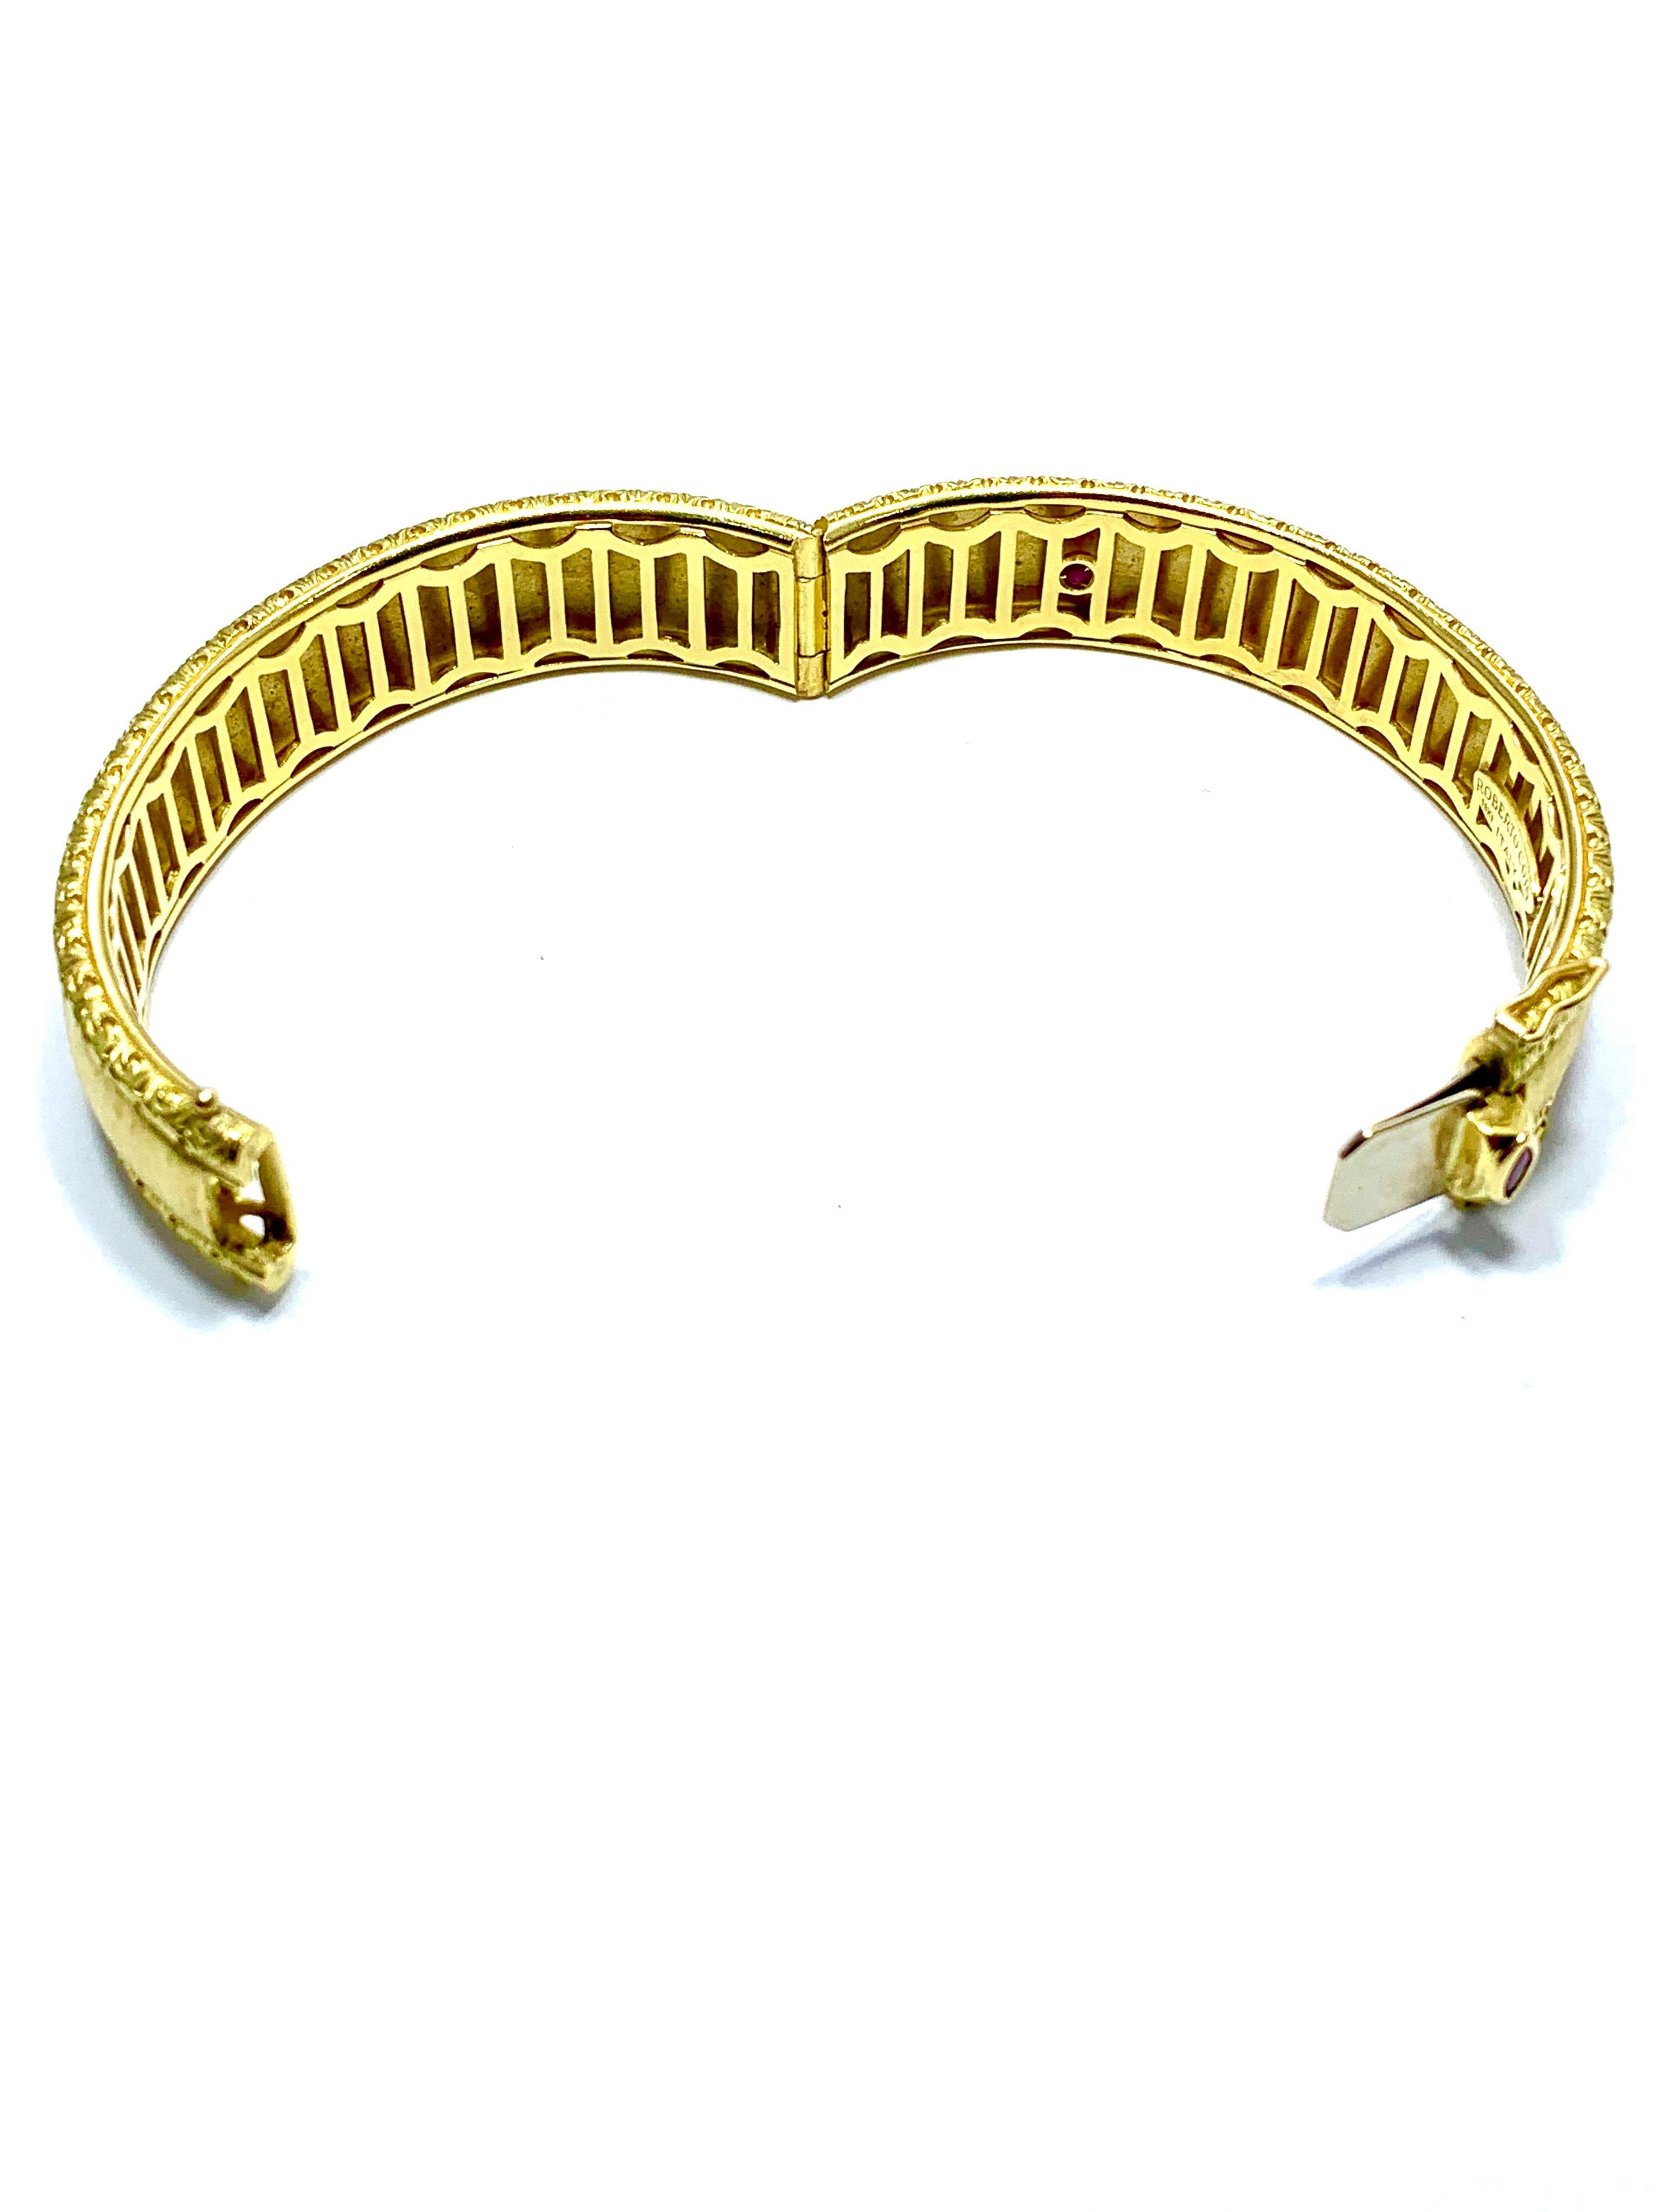 Roberto Coin 18 Karat Yellow Gold Bangle Bracelet with a Ruby Clasp 1